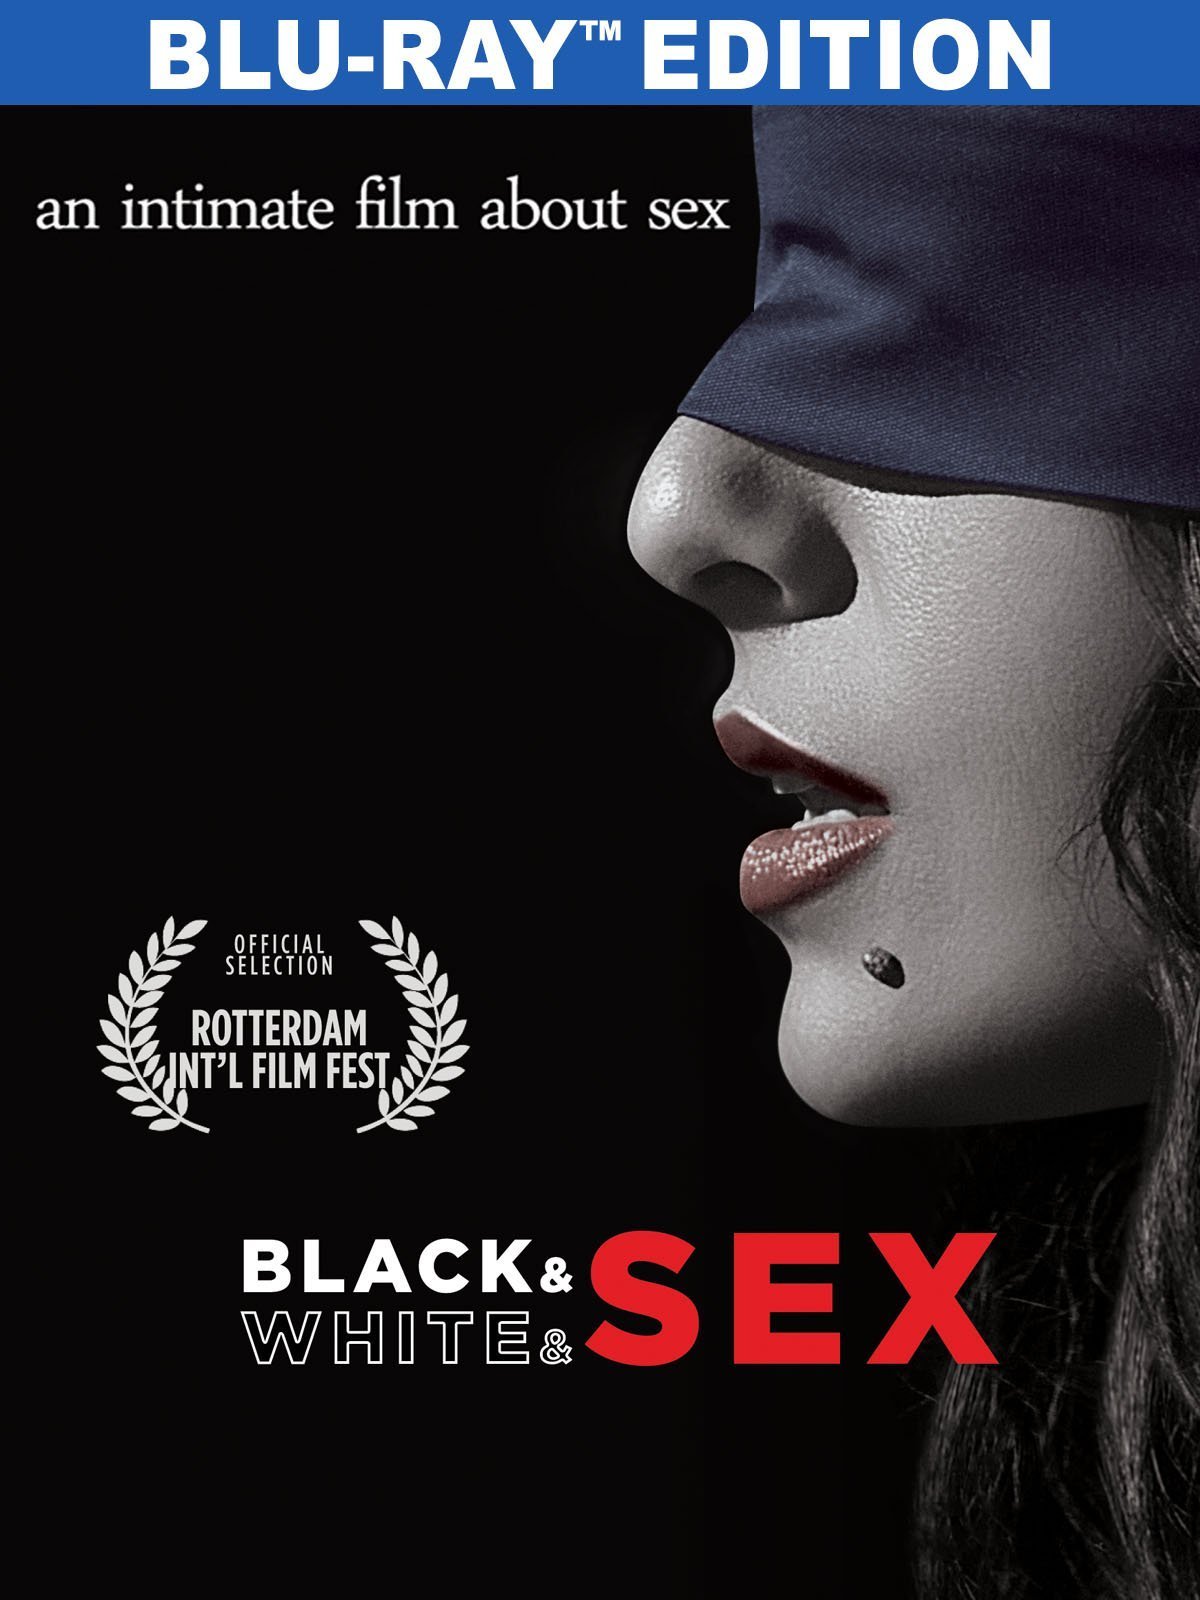 Black and White and Sex Blu-ray photo